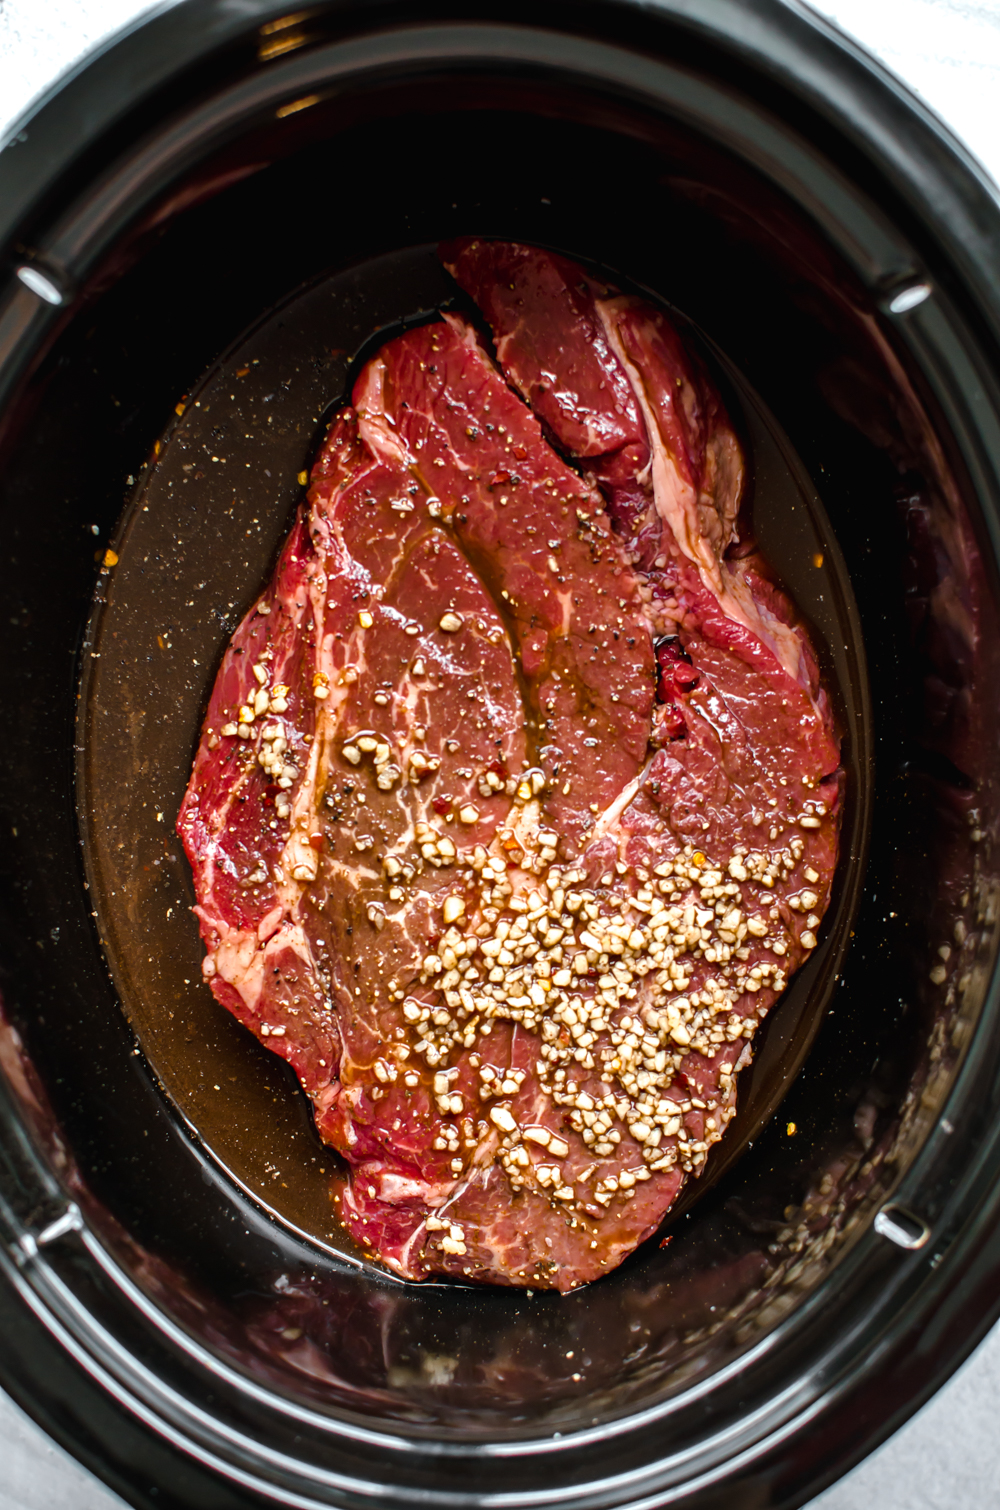 Seasoned chuck roast in a slow cooker getting ready to be cooked.